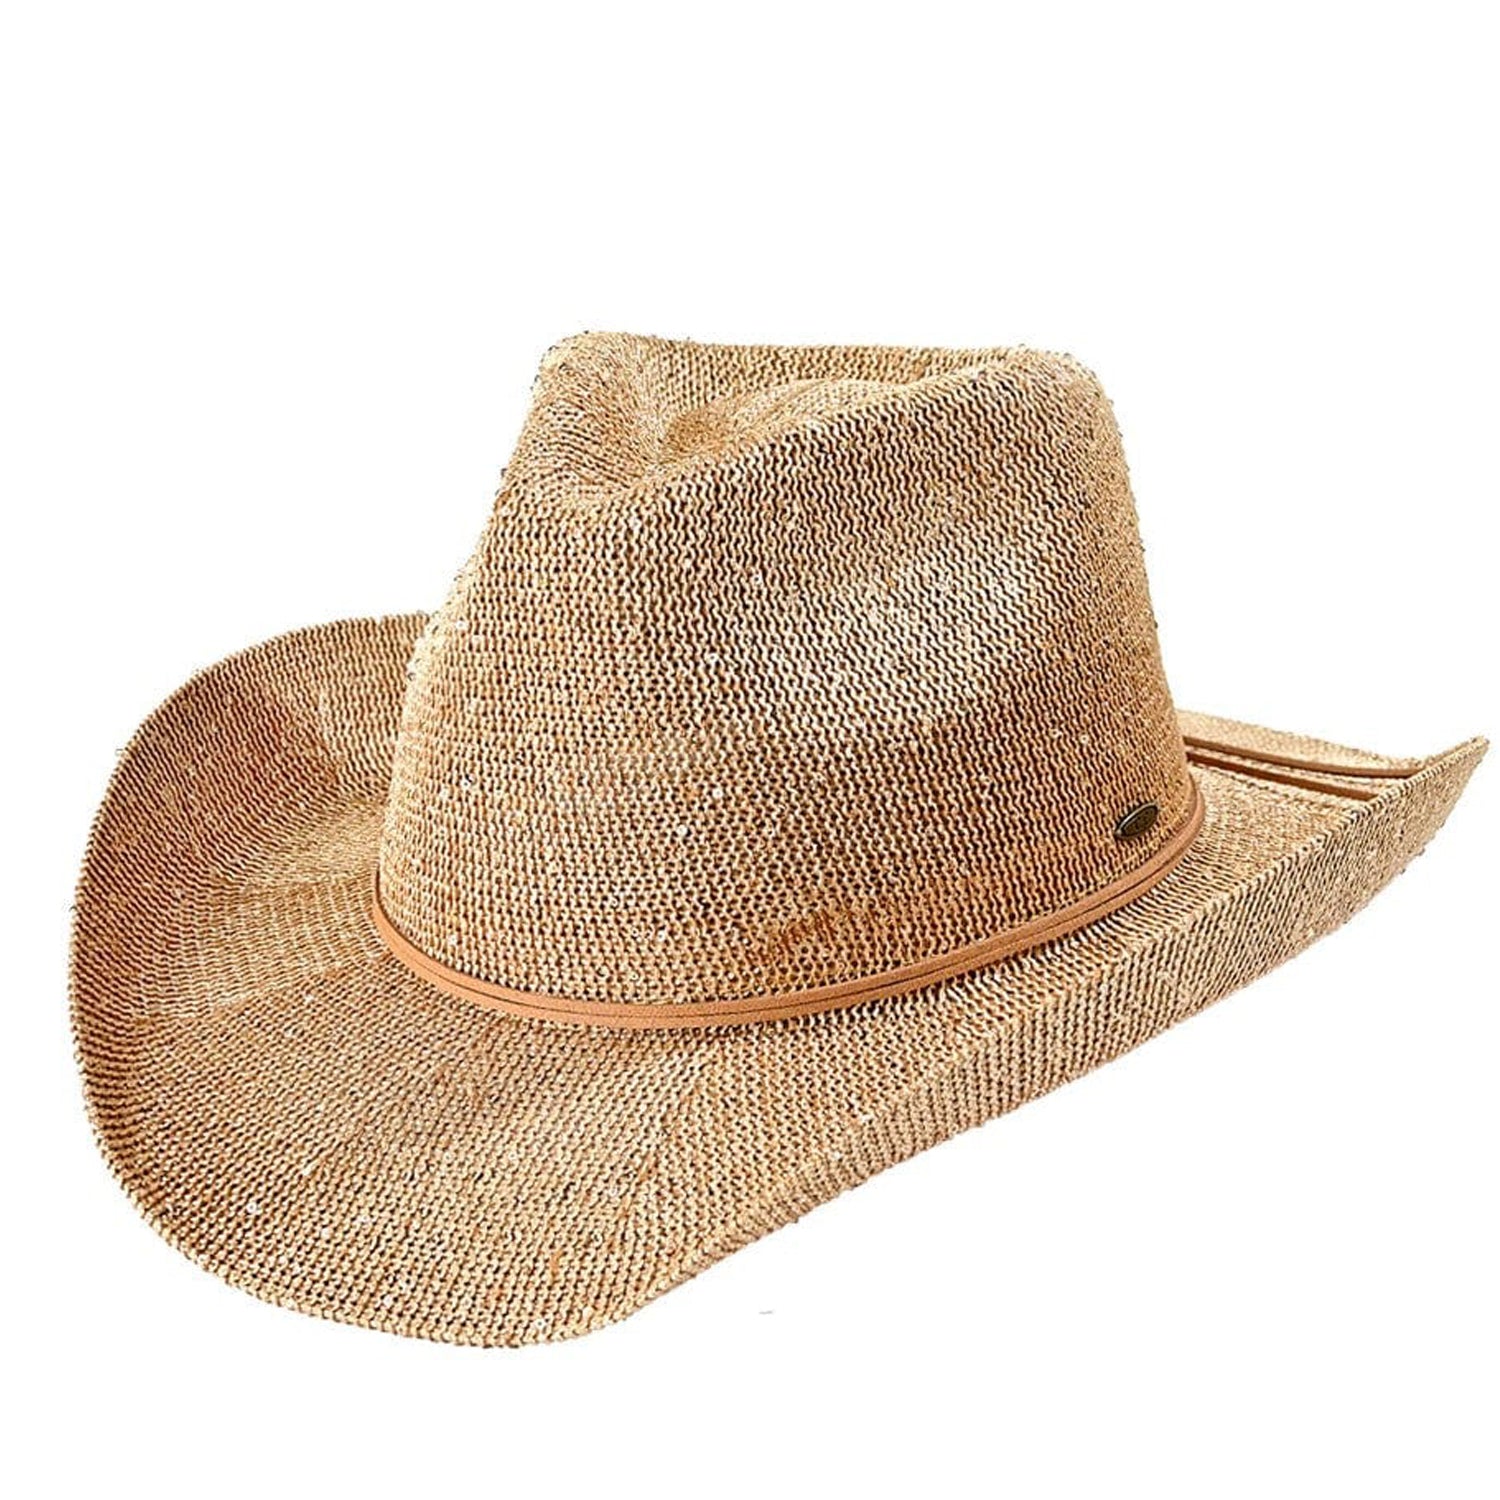 CBC-03 Cowgirl Hat with Glitter Gold